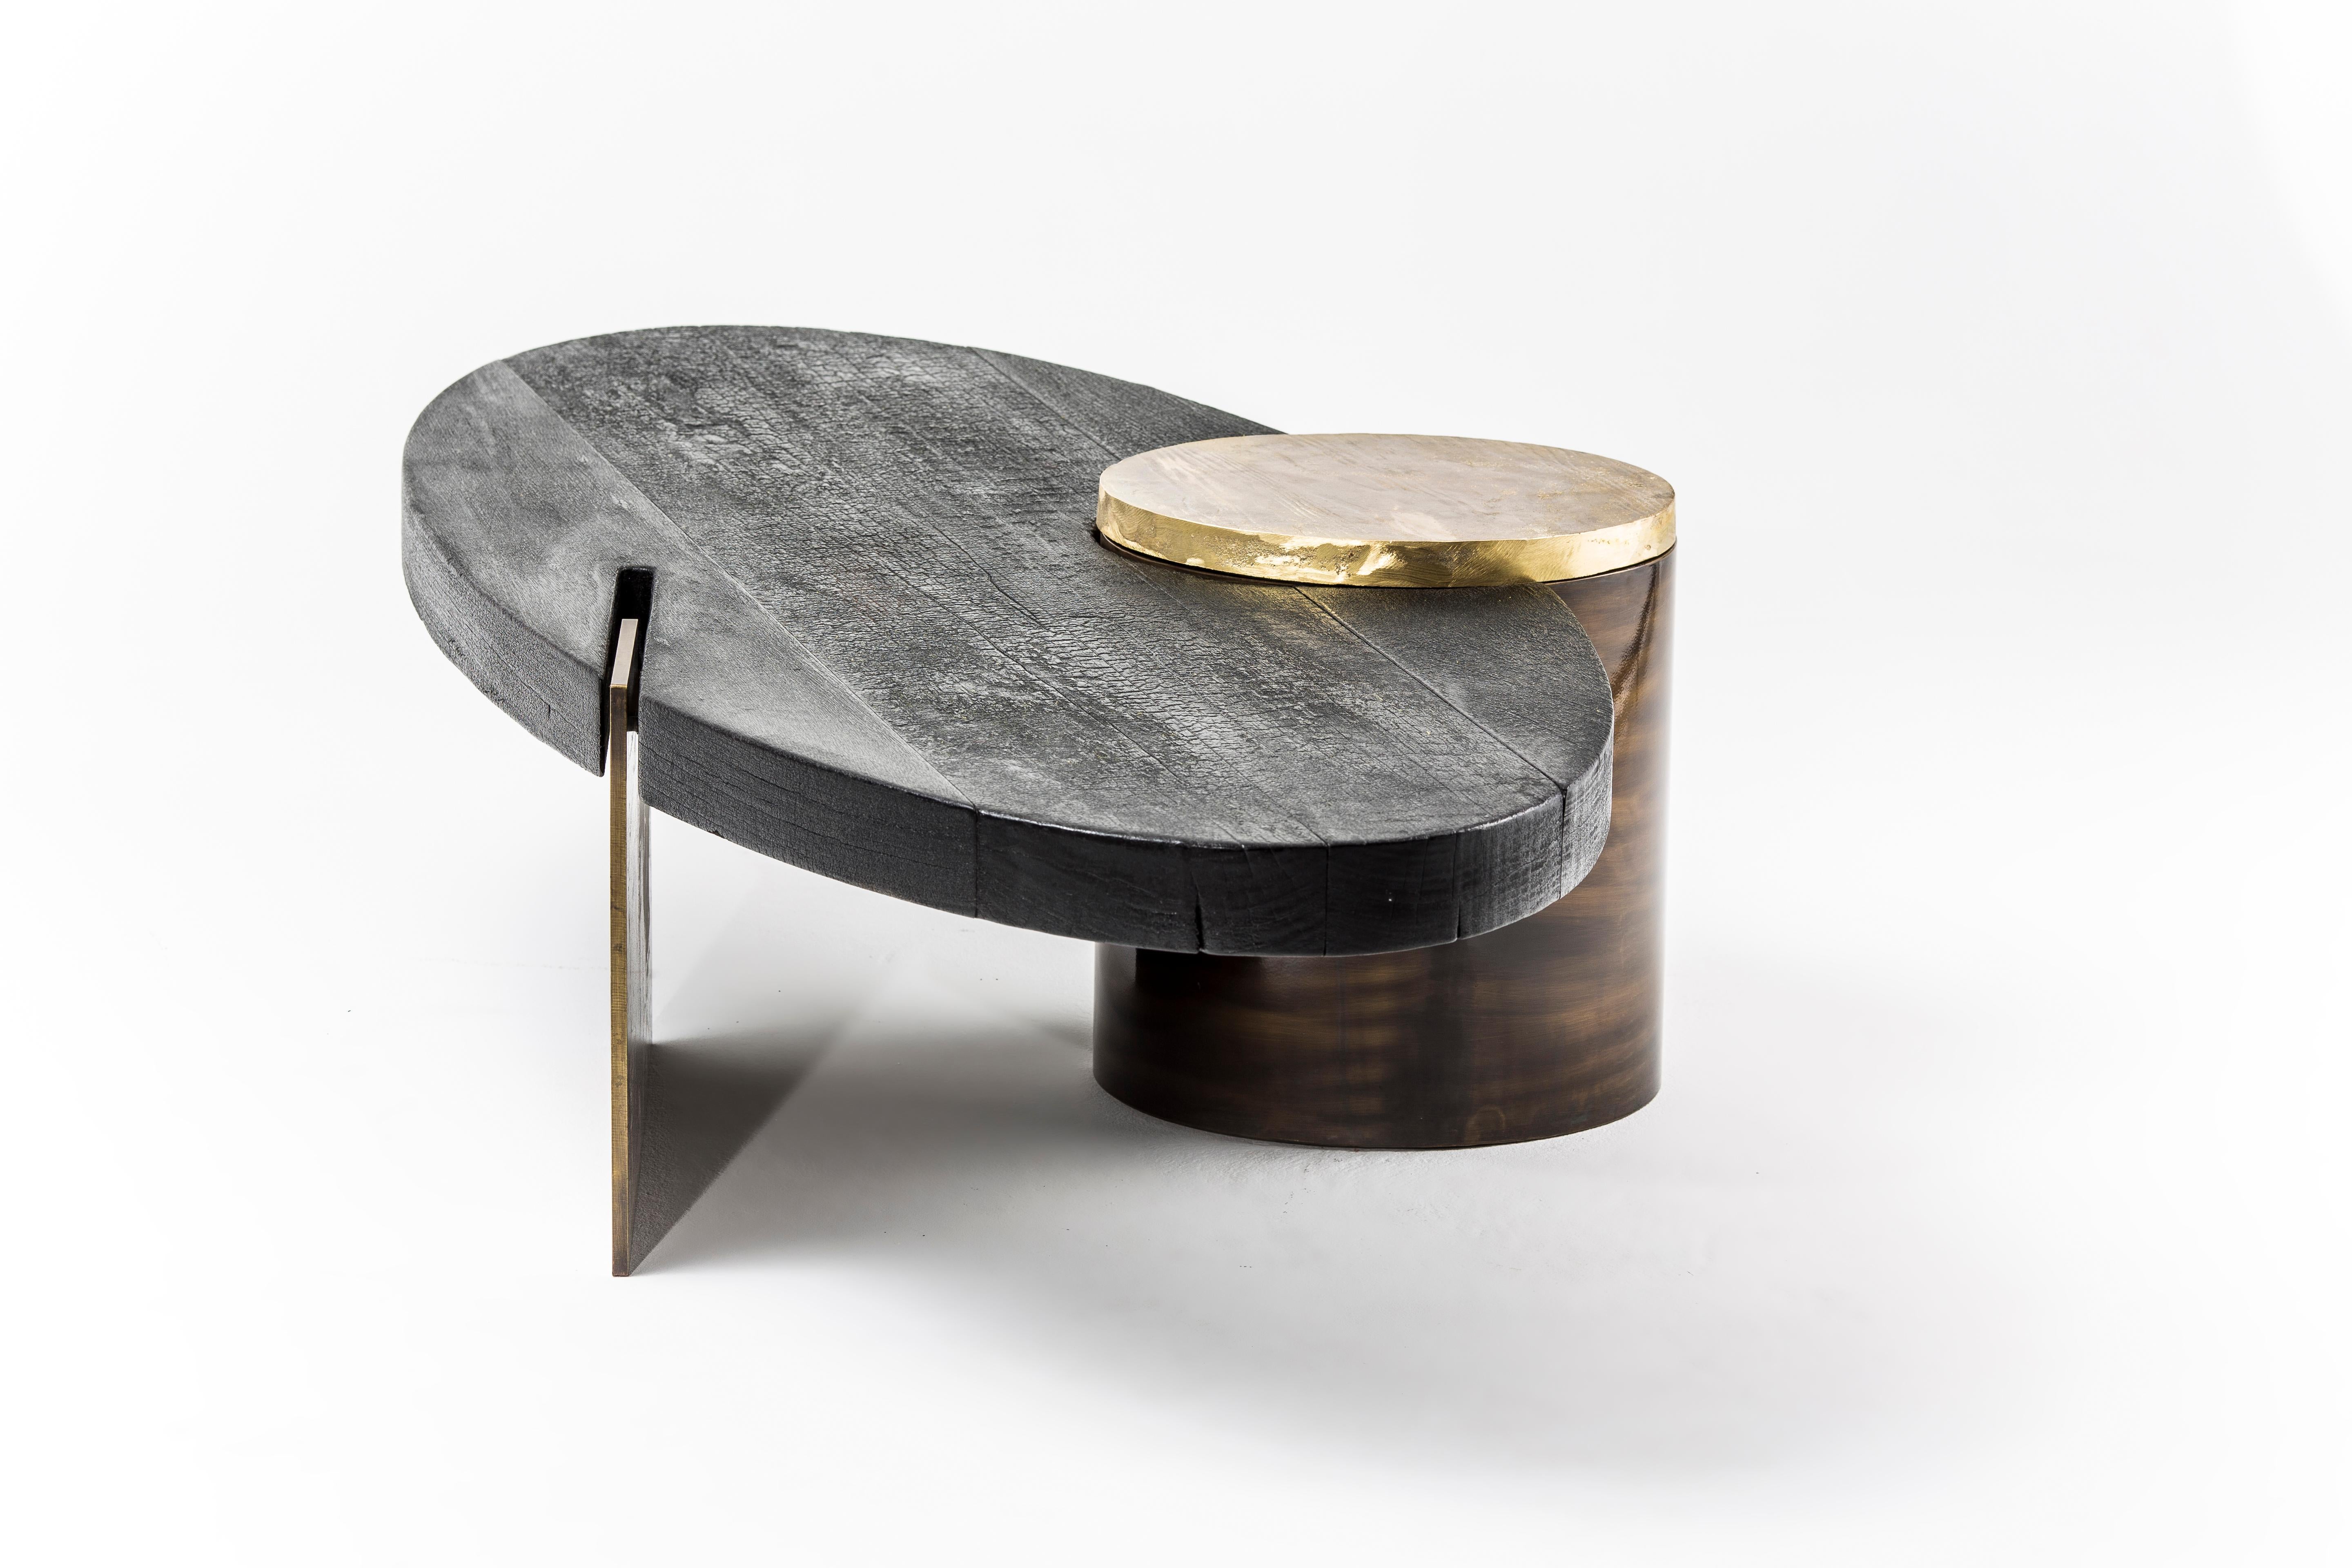 Primal coffee table by Egg Designs
Dimensions: 180 L X 80 D X 40 H cm
Materials: shou sugi ban hardwood, solid cast brass, bronze coated steel, brass

Founded by South Africans and life partners, Greg and Roche Dry - Egg is a unique perspective